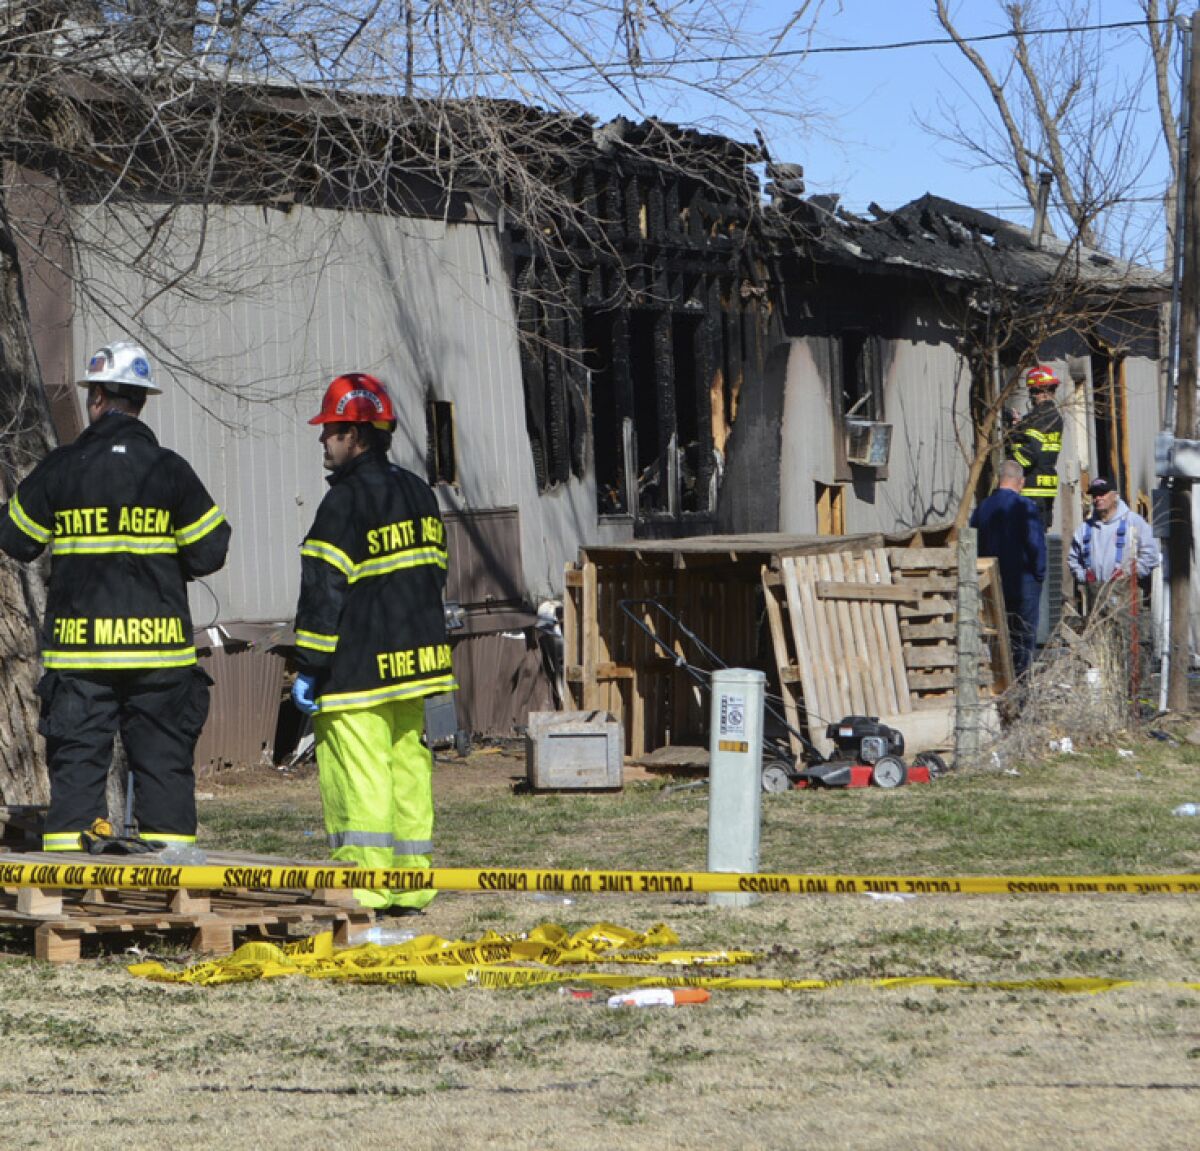 Investigators from the State Fire Marshal's office go over the site of a multi-fatality mobile home fire in Woodward, Okla., Wednesday, March 3, 2021. Officials say six people, including some children, are dead after a fire swept through the home. Fire Chief Todd Finley says one boy escaped the blaze early Thursday morning after a firefighter and a bystander were able to free him from a window. (Dawnita Fogleman/The Woodward News via AP)